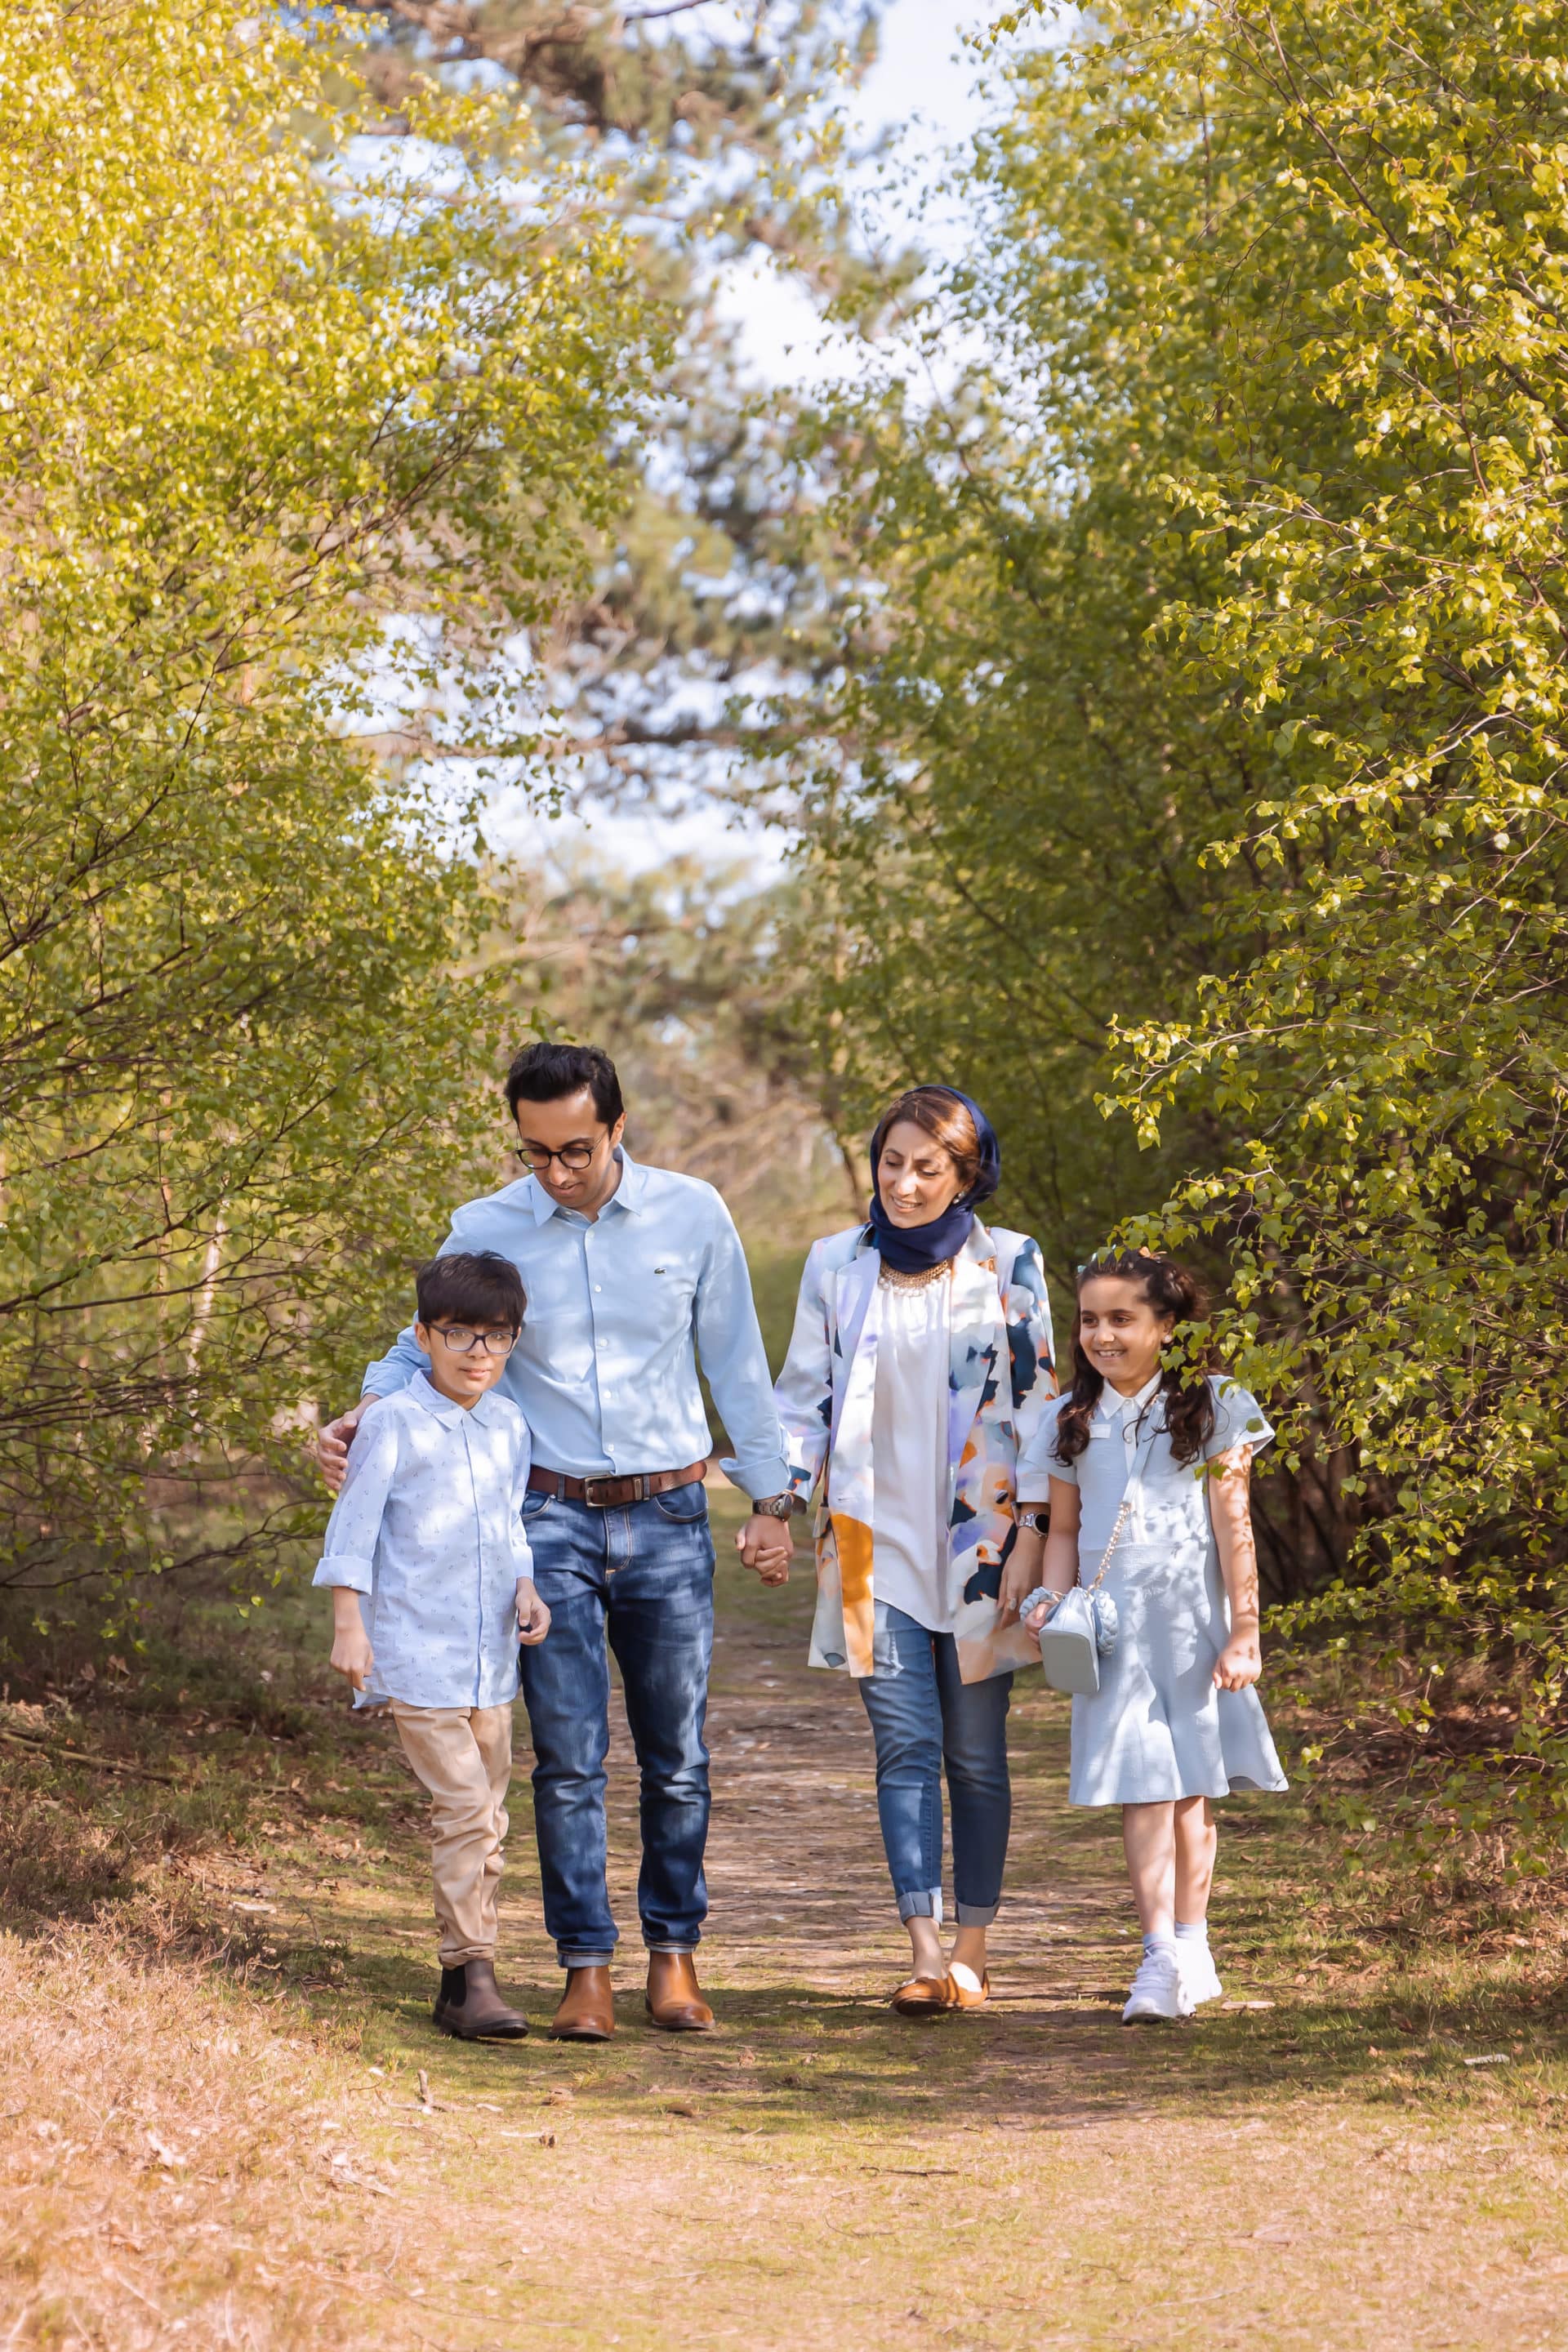 outdoor photograph, family walking through the park surrounded by trees.  family all talking.  Taken by family photographer sutton coldfield birmingham